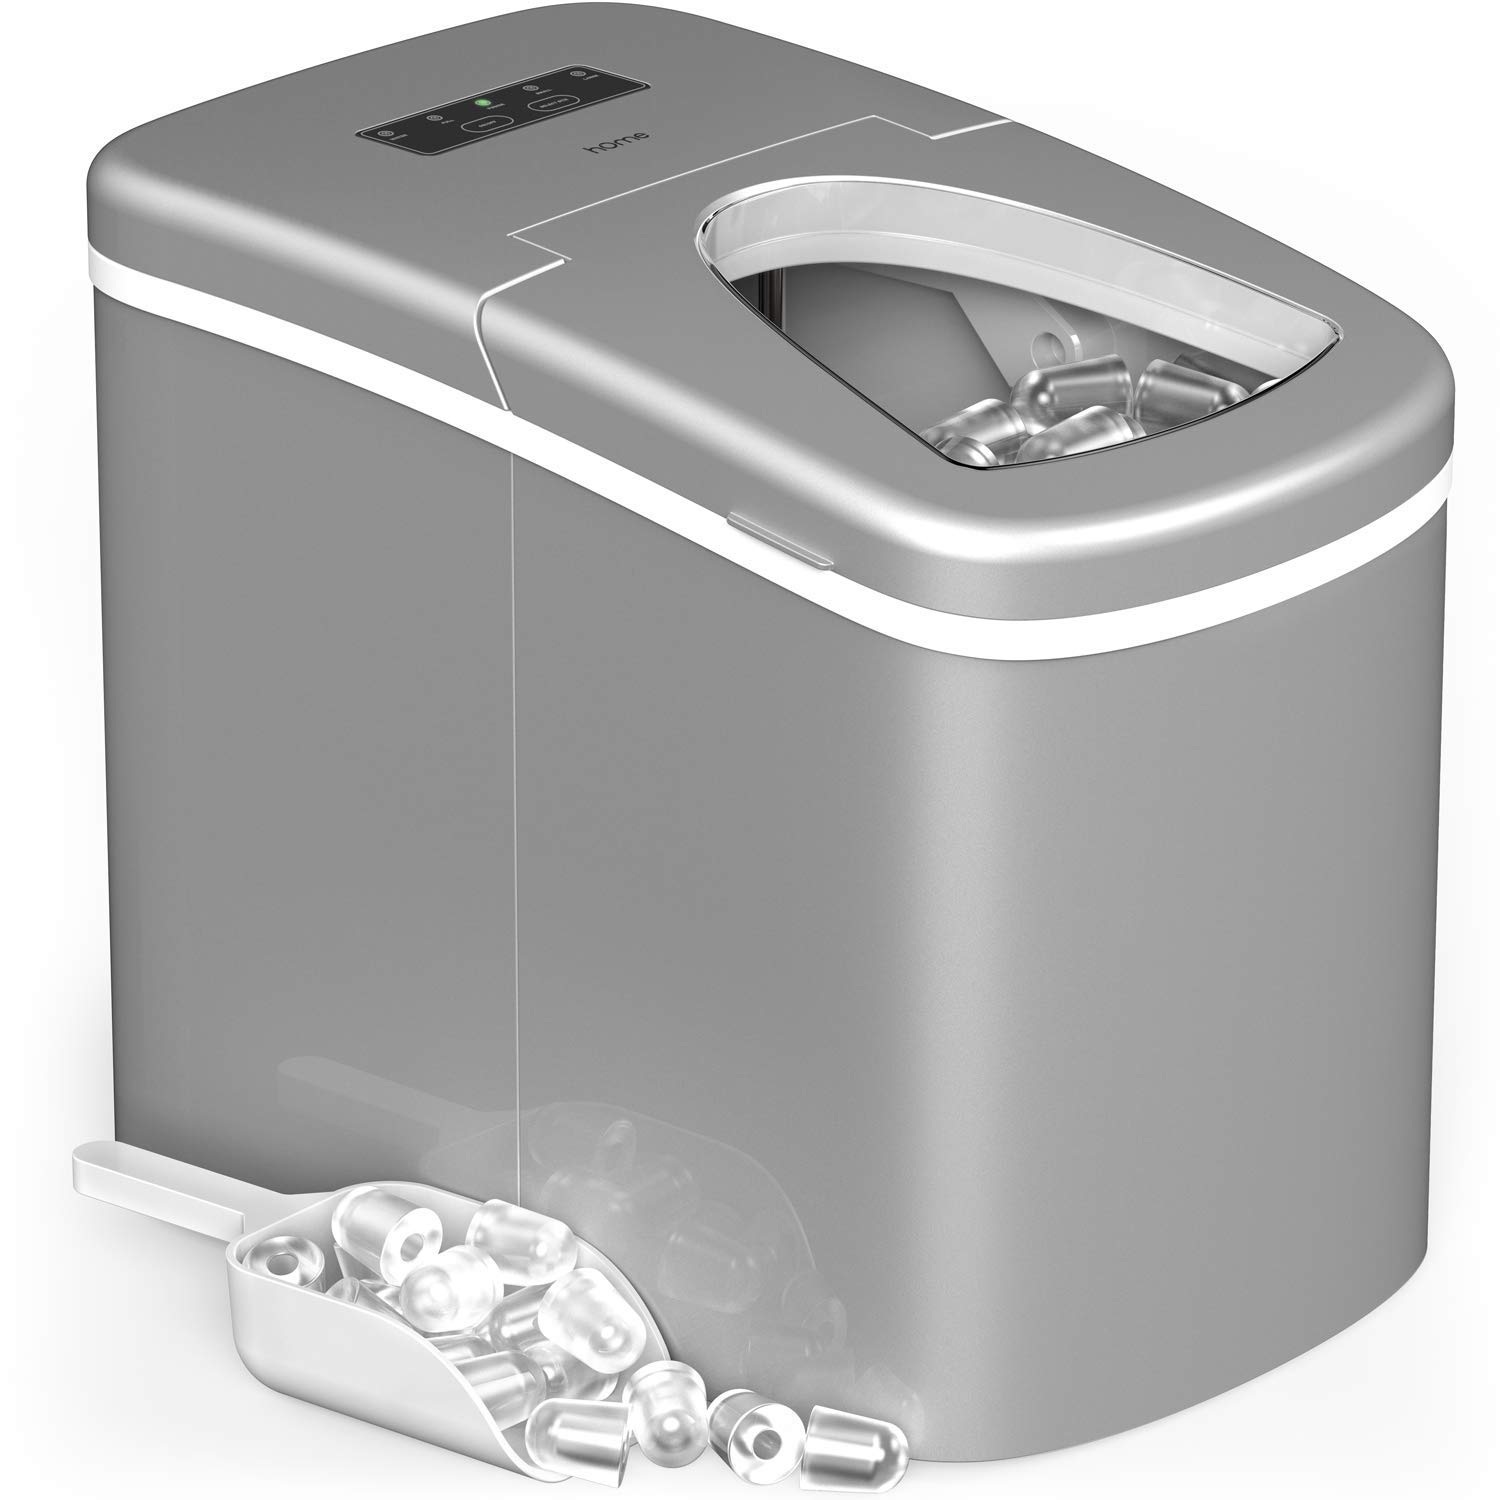 hOmeLabs Portable Ice Maker Machine for Countertop 